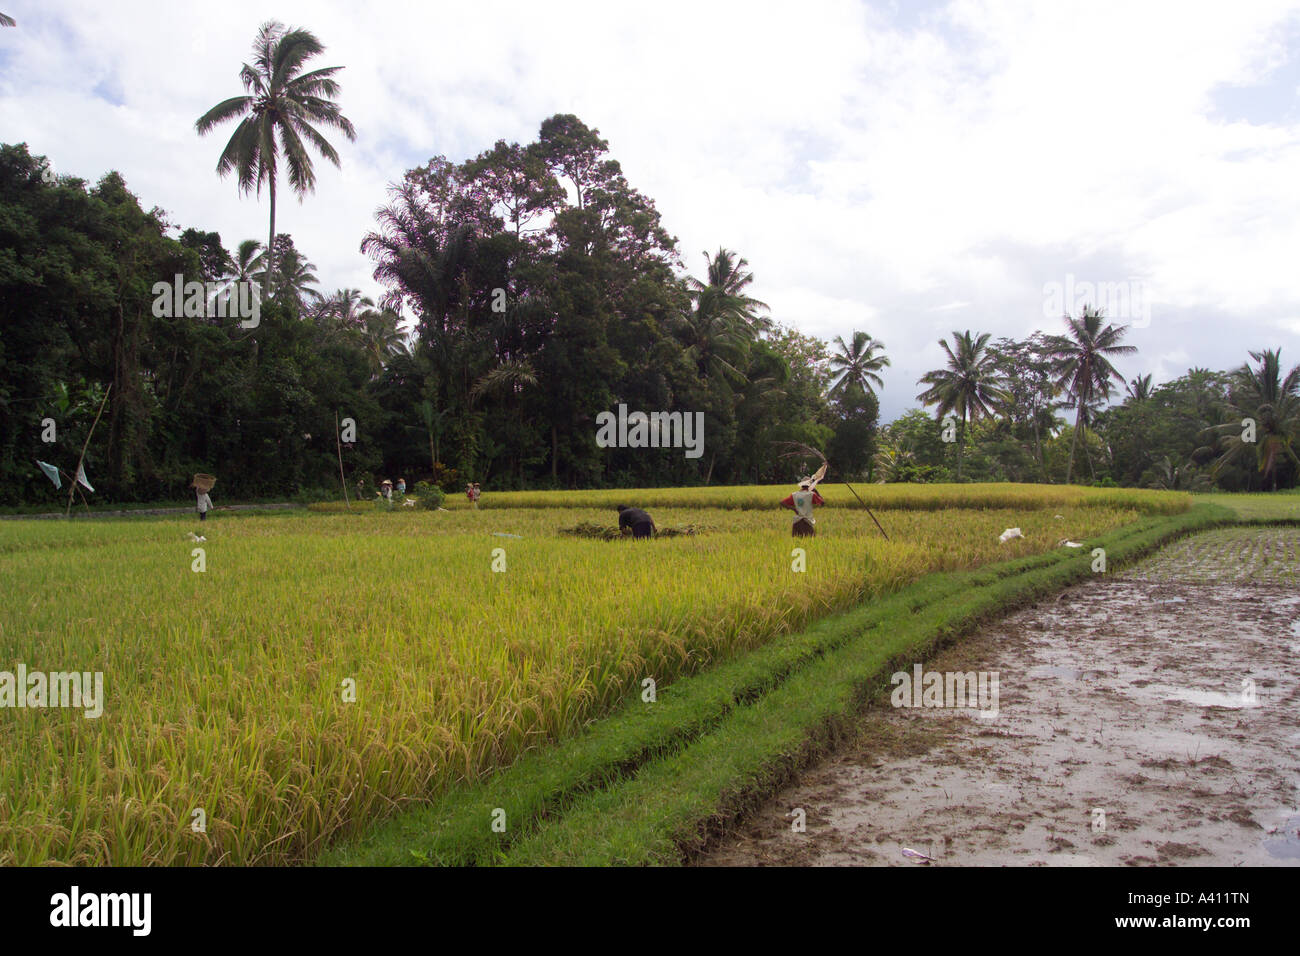 workers tending paddy field Bali Indonesia Stock Photo